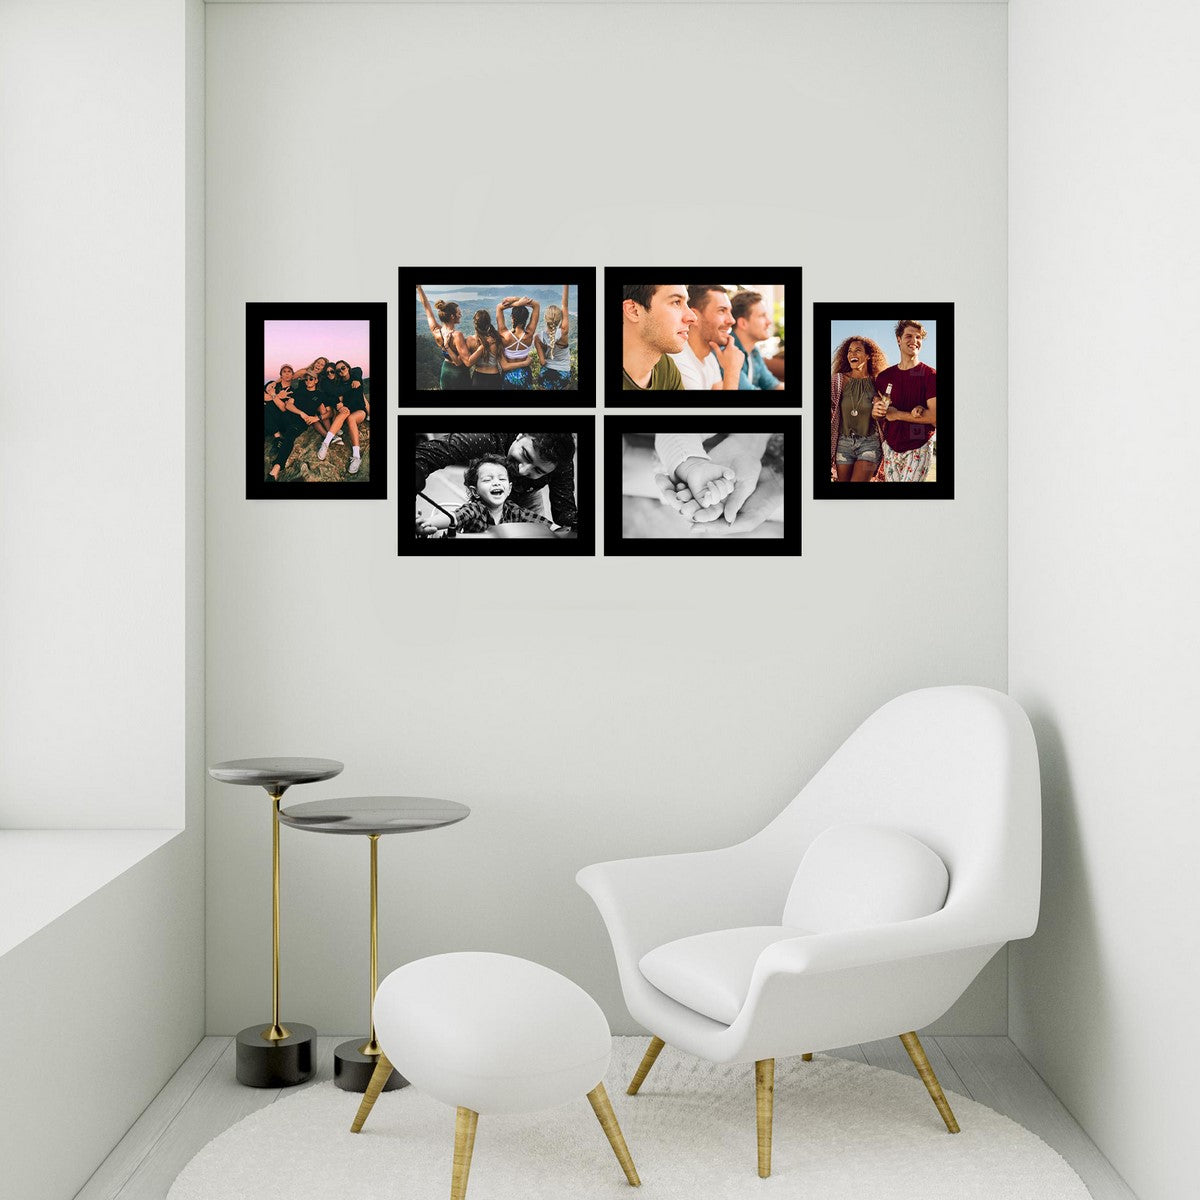 Memory Wall Collage Photo Frame - Set of 6 Photo Frames for 6 Photos of 5"x7" 2